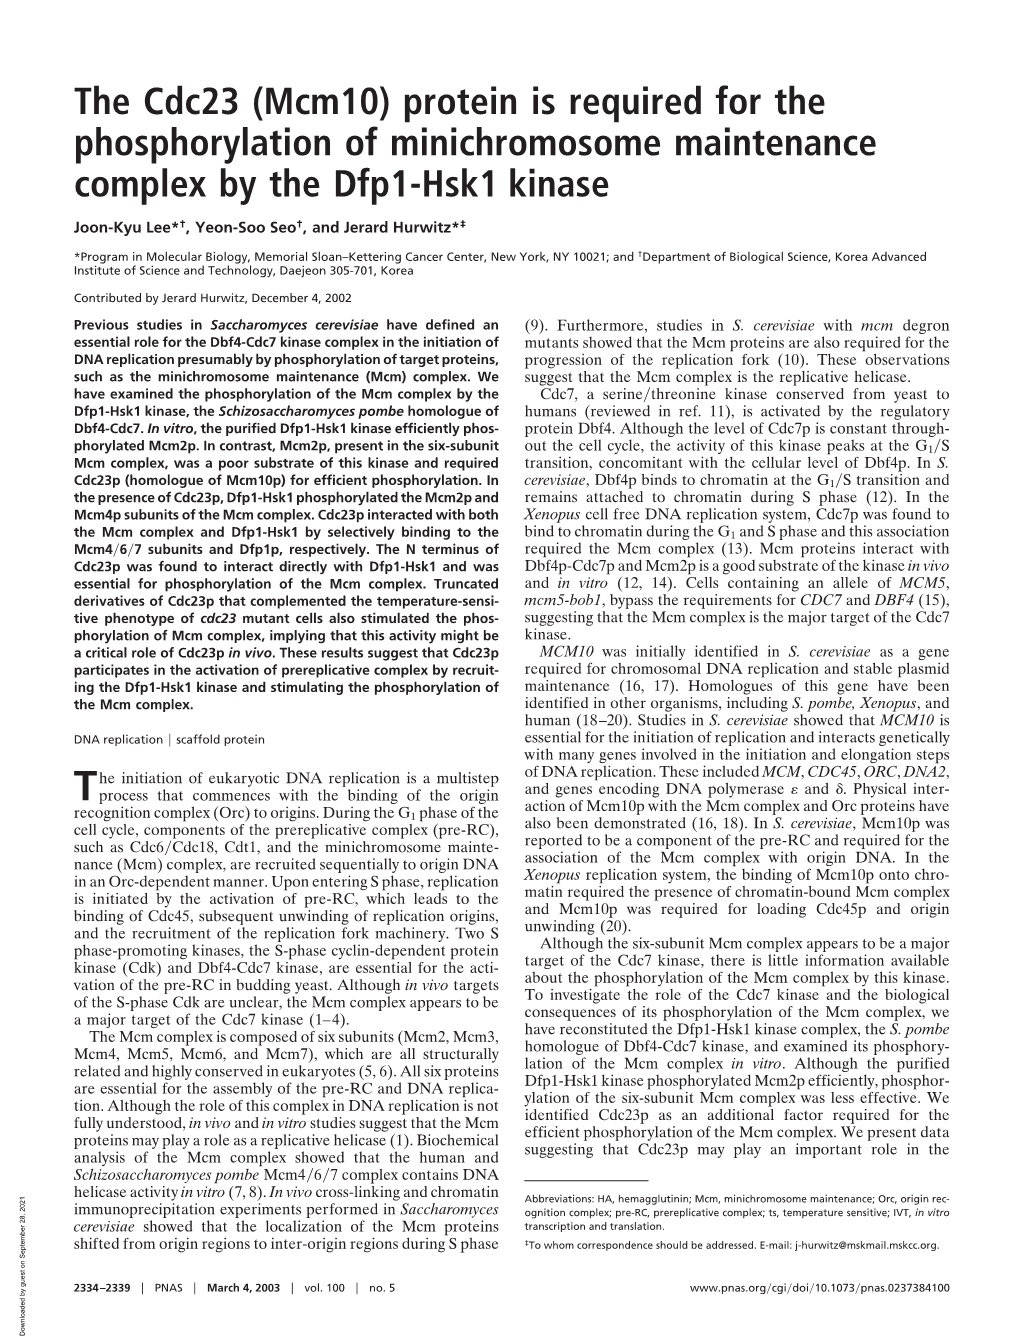 The Cdc23 (Mcm10) Protein Is Required for the Phosphorylation of Minichromosome Maintenance Complex by the Dfp1-Hsk1 Kinase